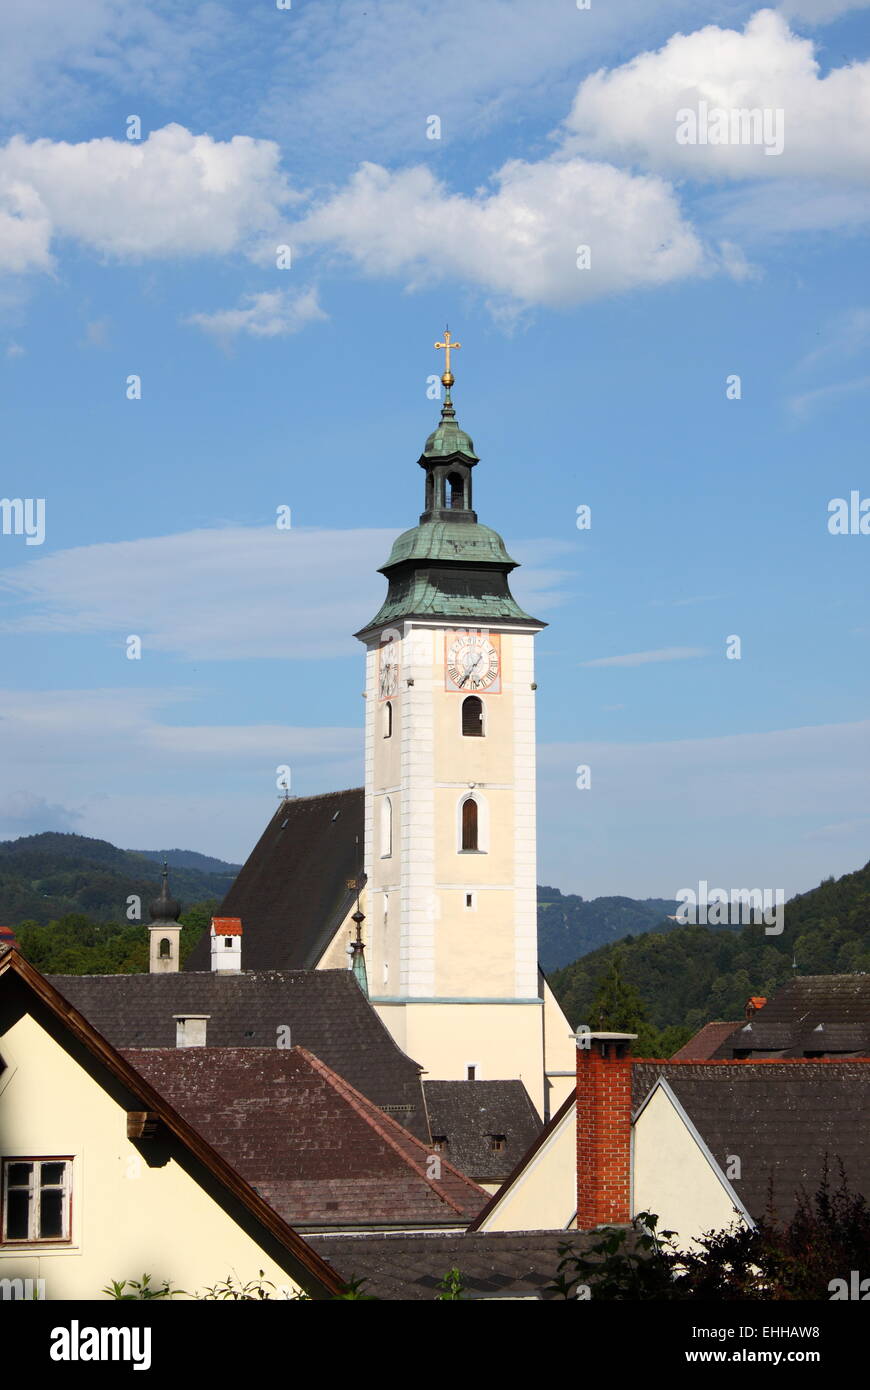 Bell tower of Grein cathedral Stock Photo